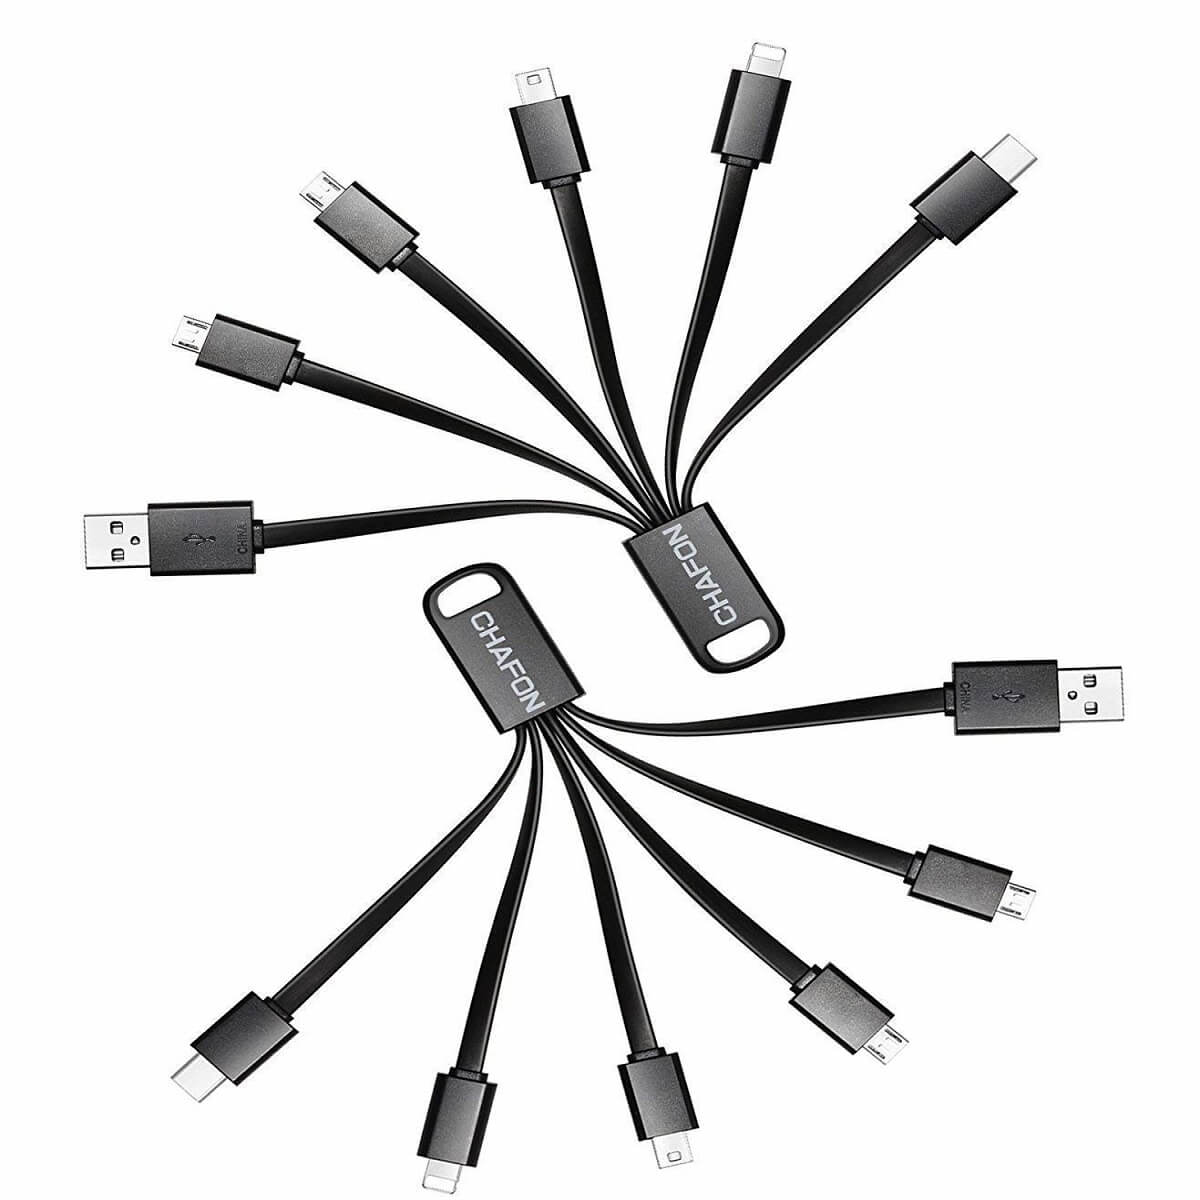 Best universal USB multi charging cables [2020 Guide]